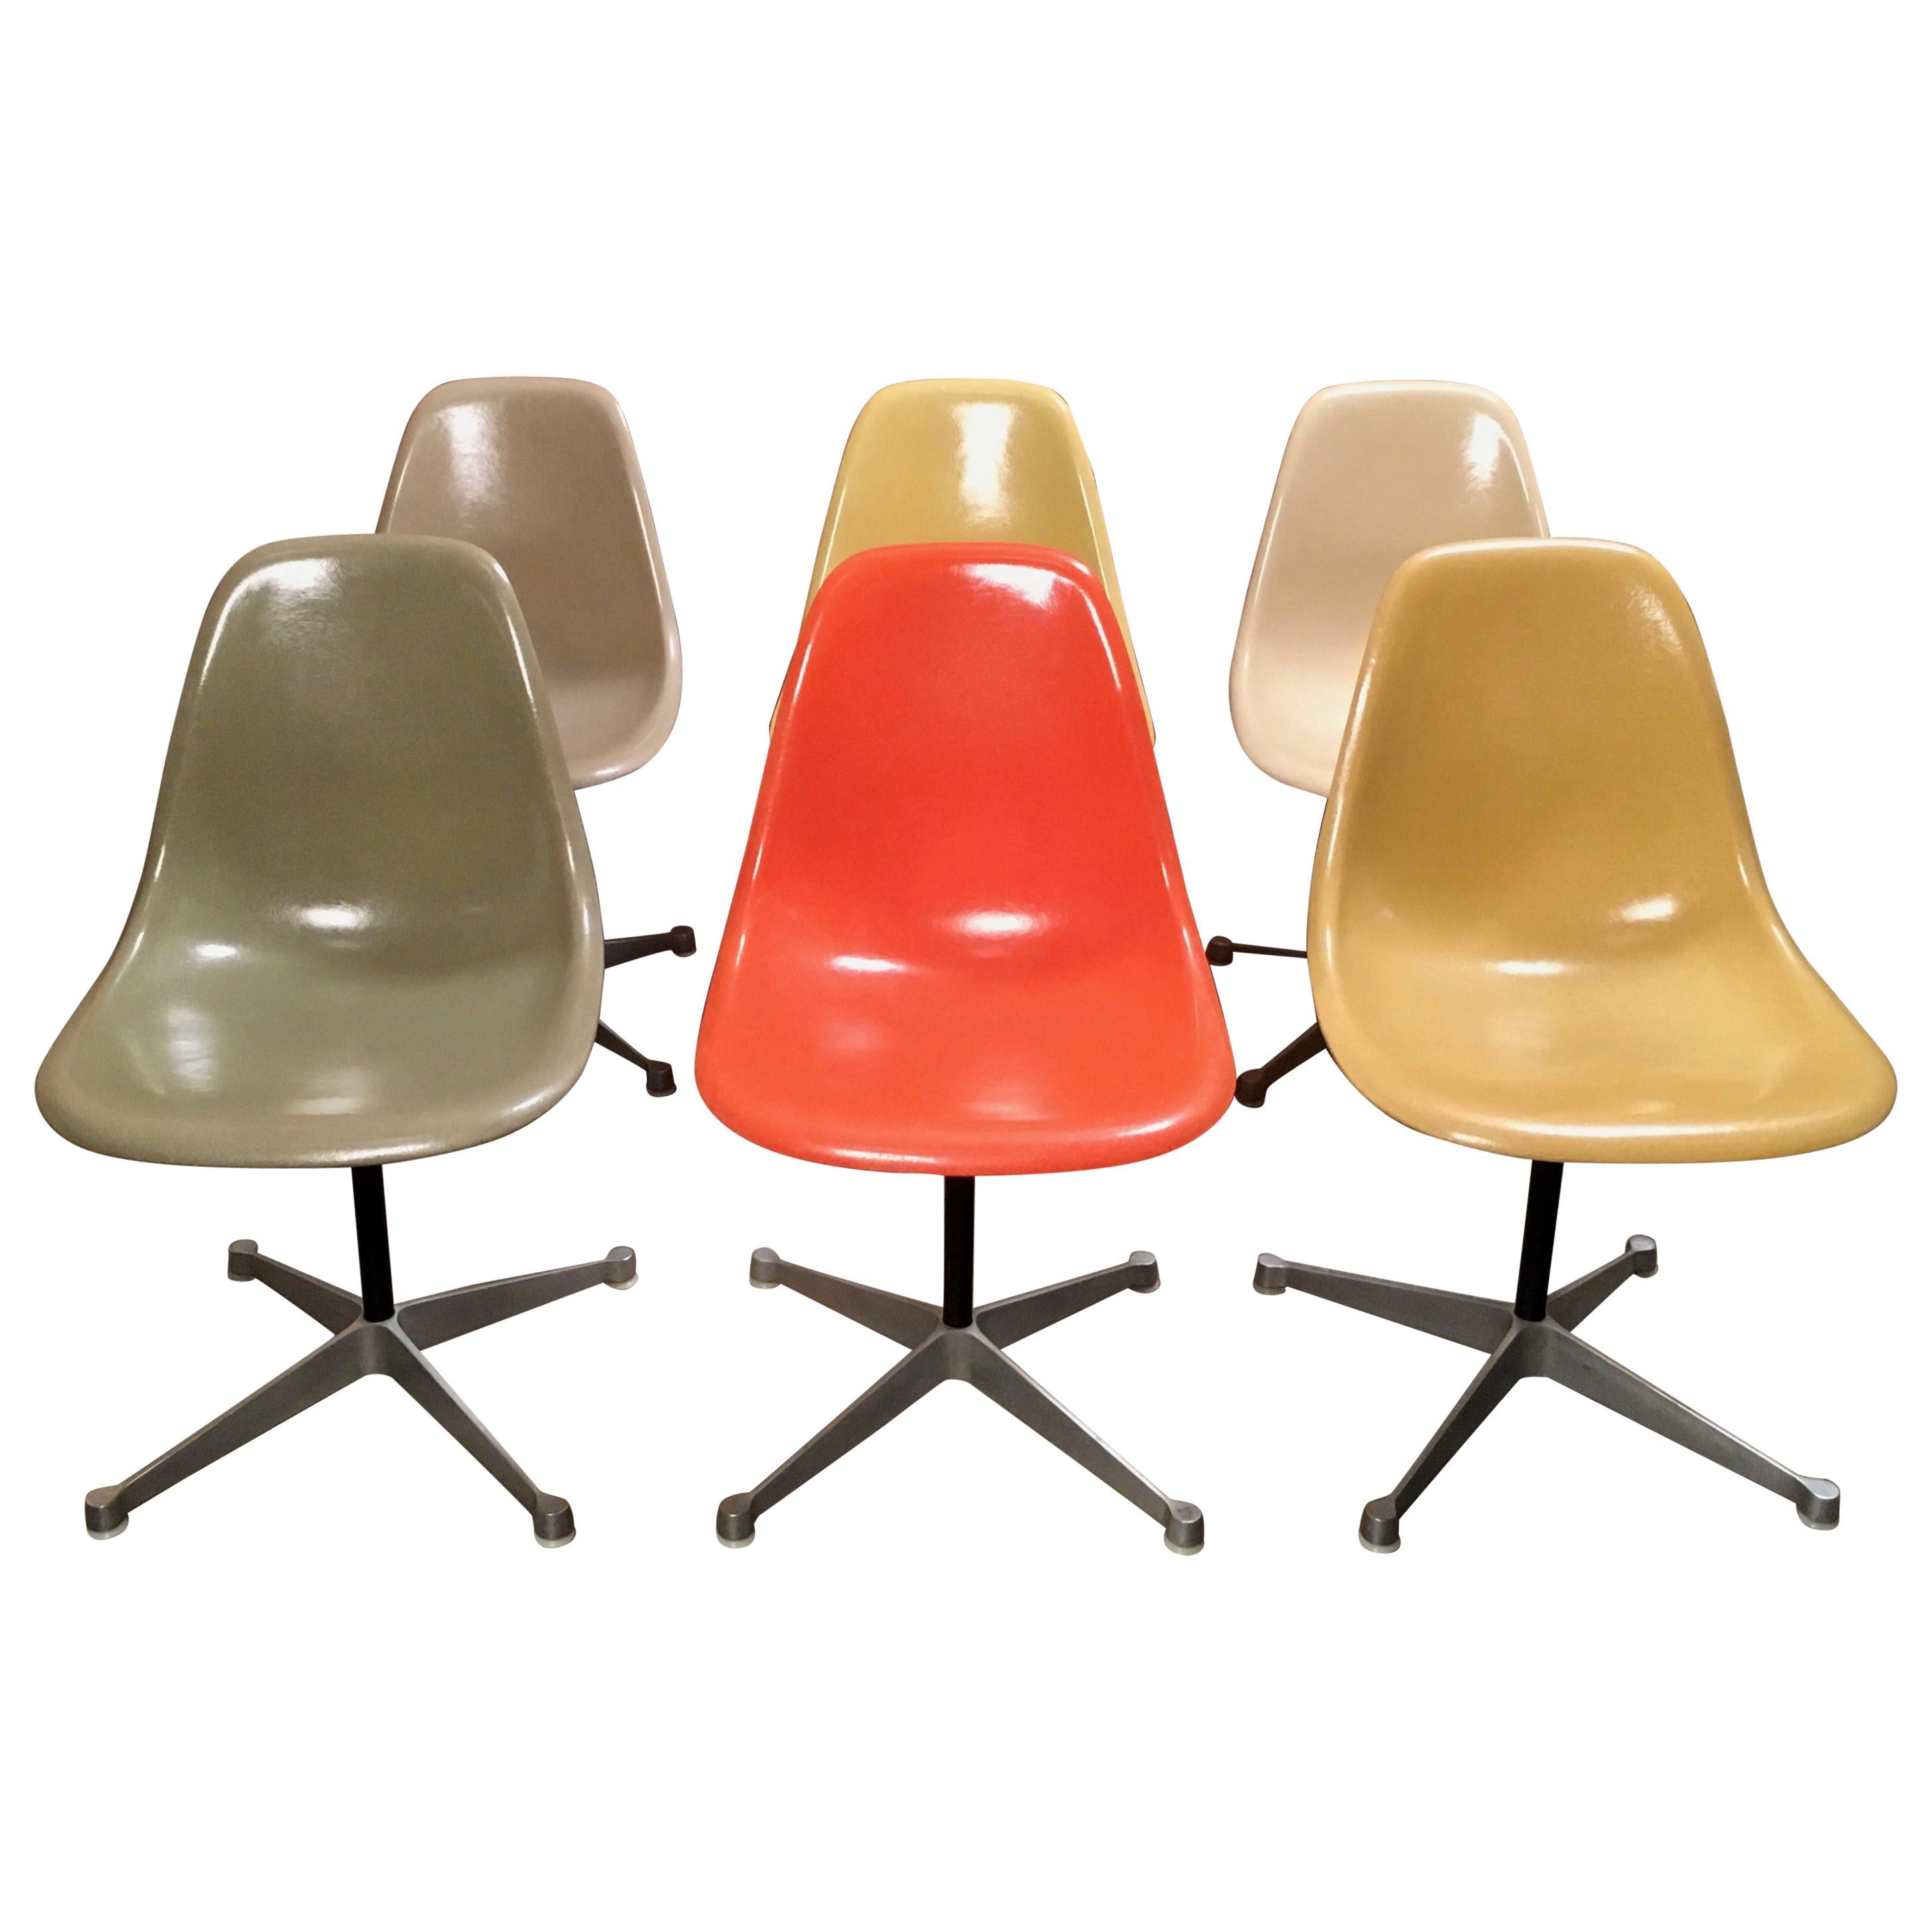 Multicolored Fiberglass Shell Chairs, Charles Eames for Herman Miller